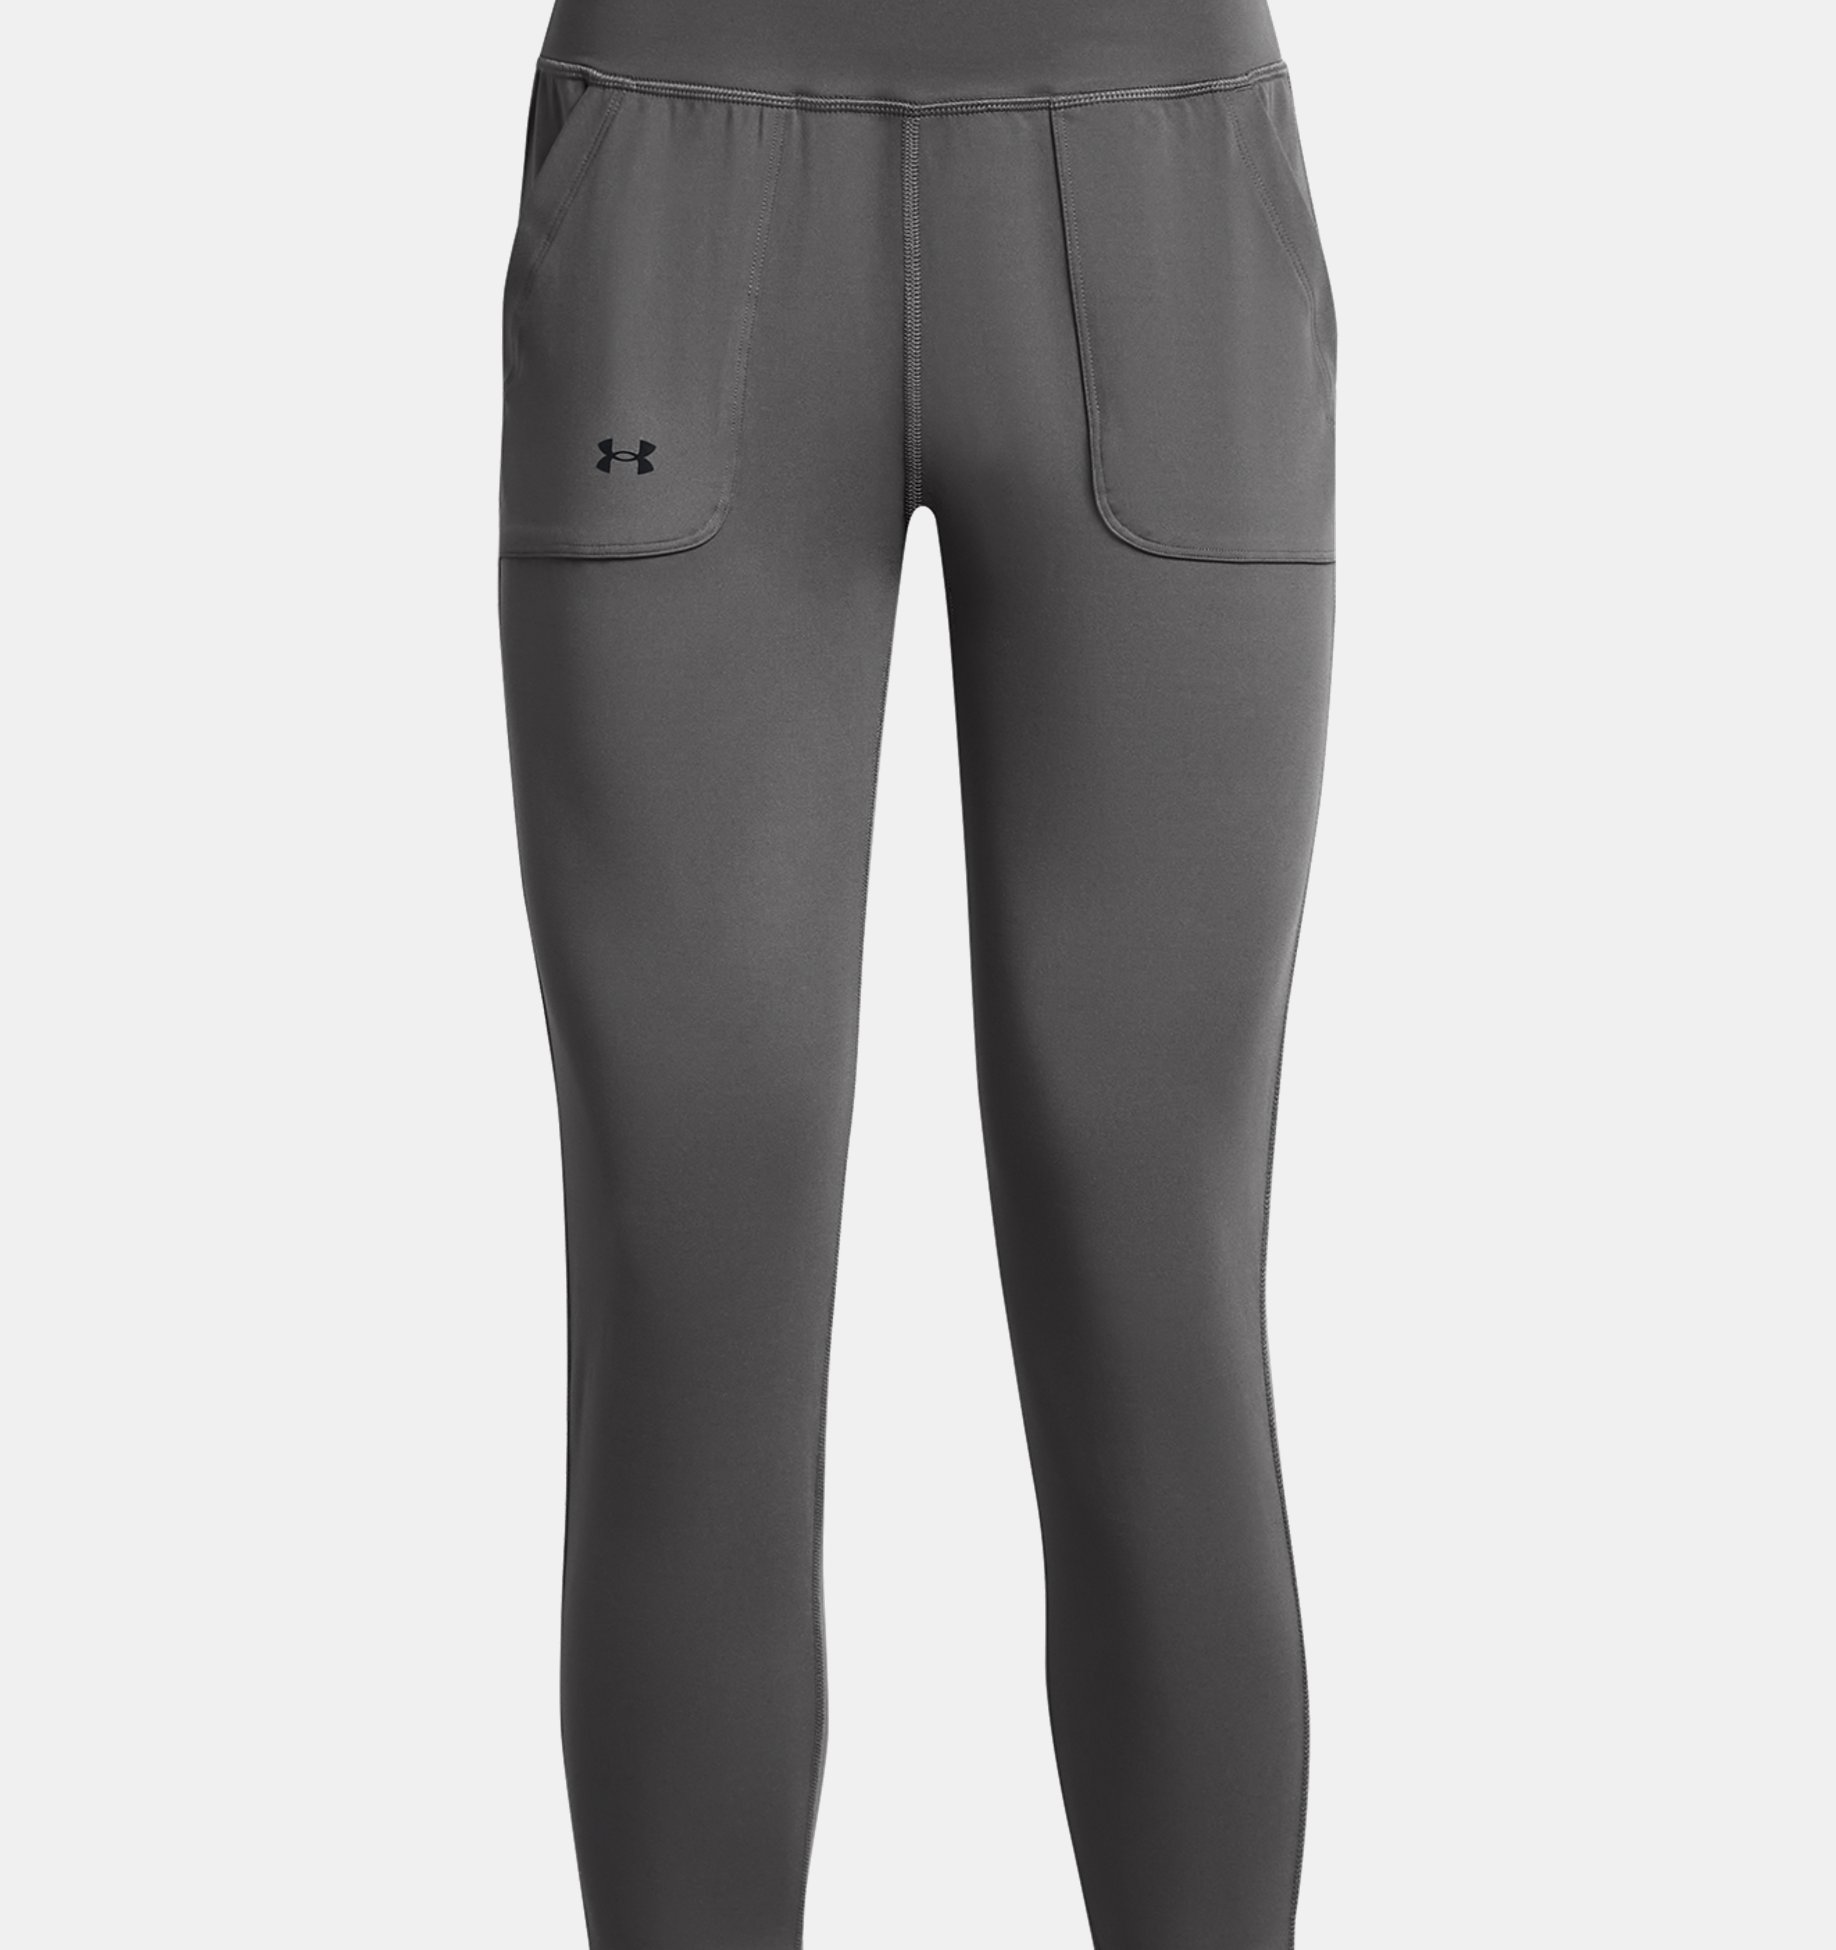 https://underarmour.scene7.com/is/image/Underarmour/PS1375077-025_HF?rp=standard-0pad|pdpZoomDesktop&scl=0.72&fmt=jpg&qlt=85&resMode=sharp2&cache=on,on&bgc=f0f0f0&wid=1836&hei=1950&size=1500,1500